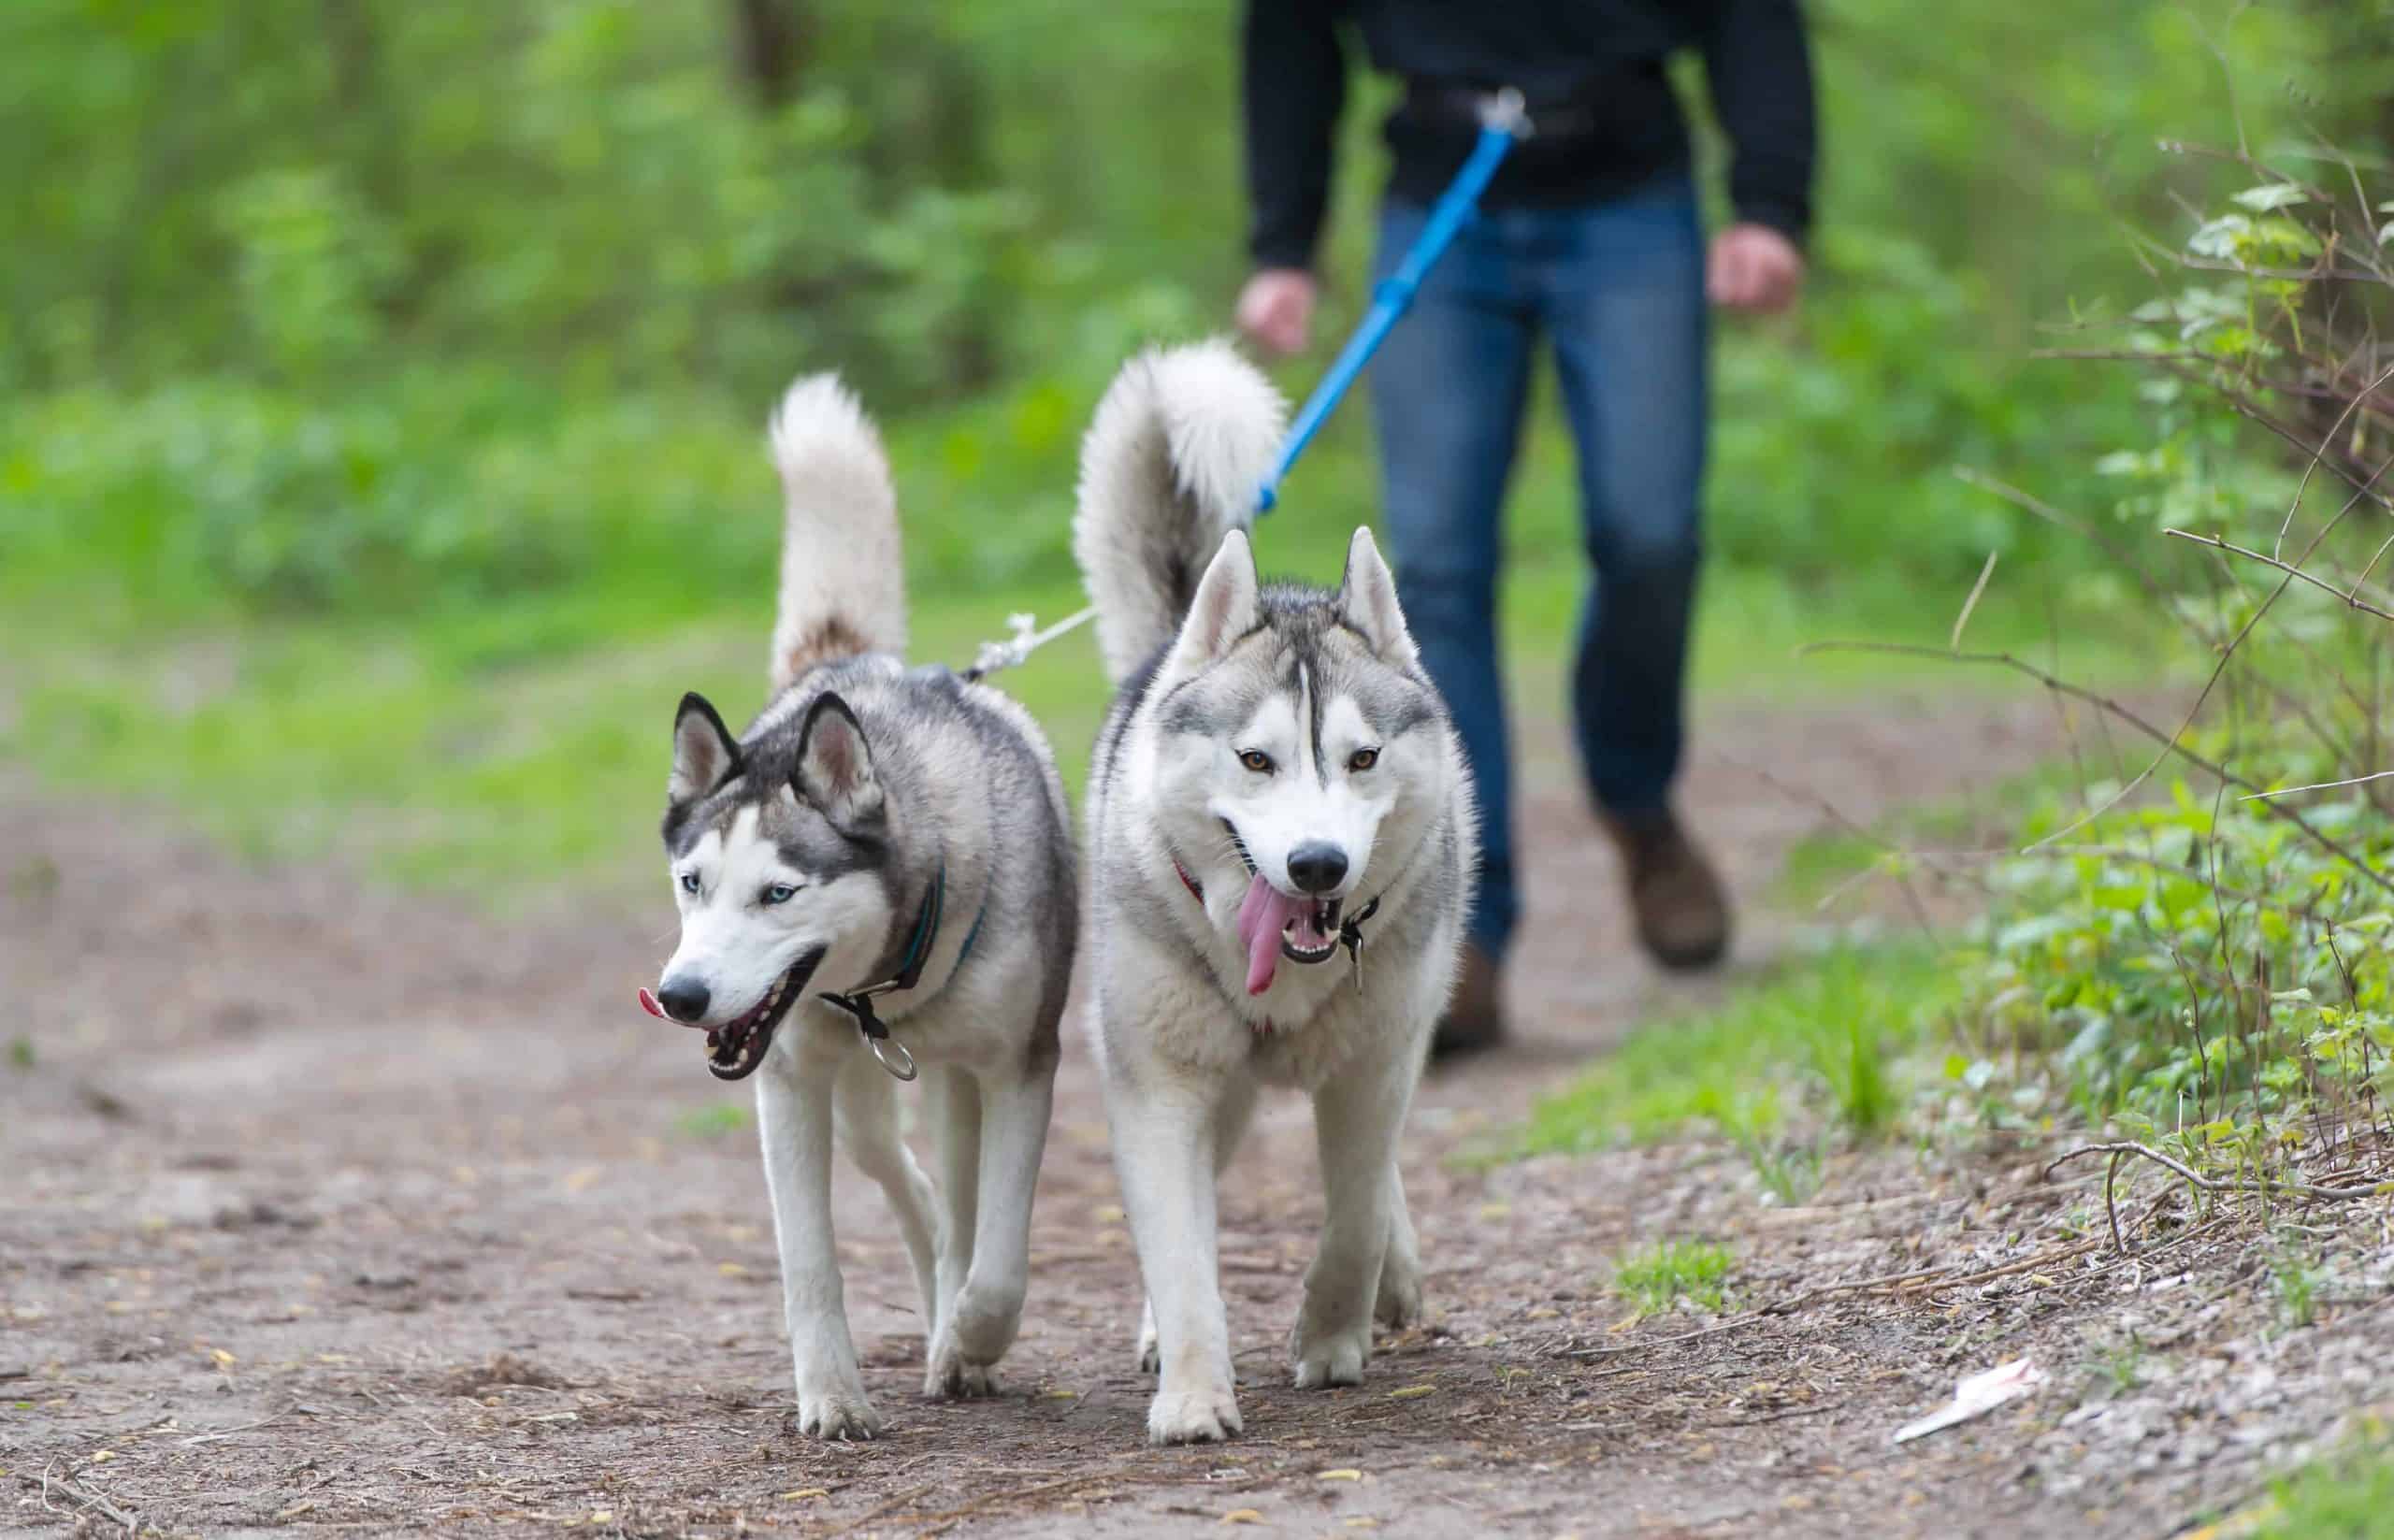 Man walks pair of Siberian Huskies. Cleaning up your dog’s favorite walking spots lowers your dog’s risk of getting into something dangerous or toxic.